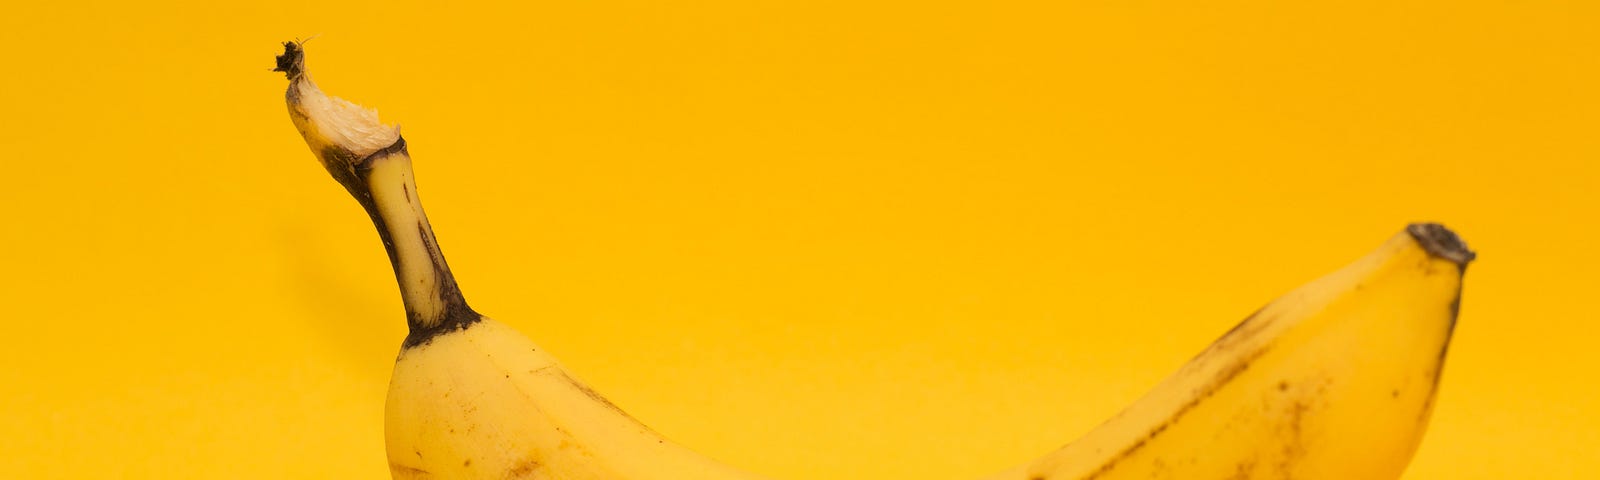 a yellow banana on a yellow background